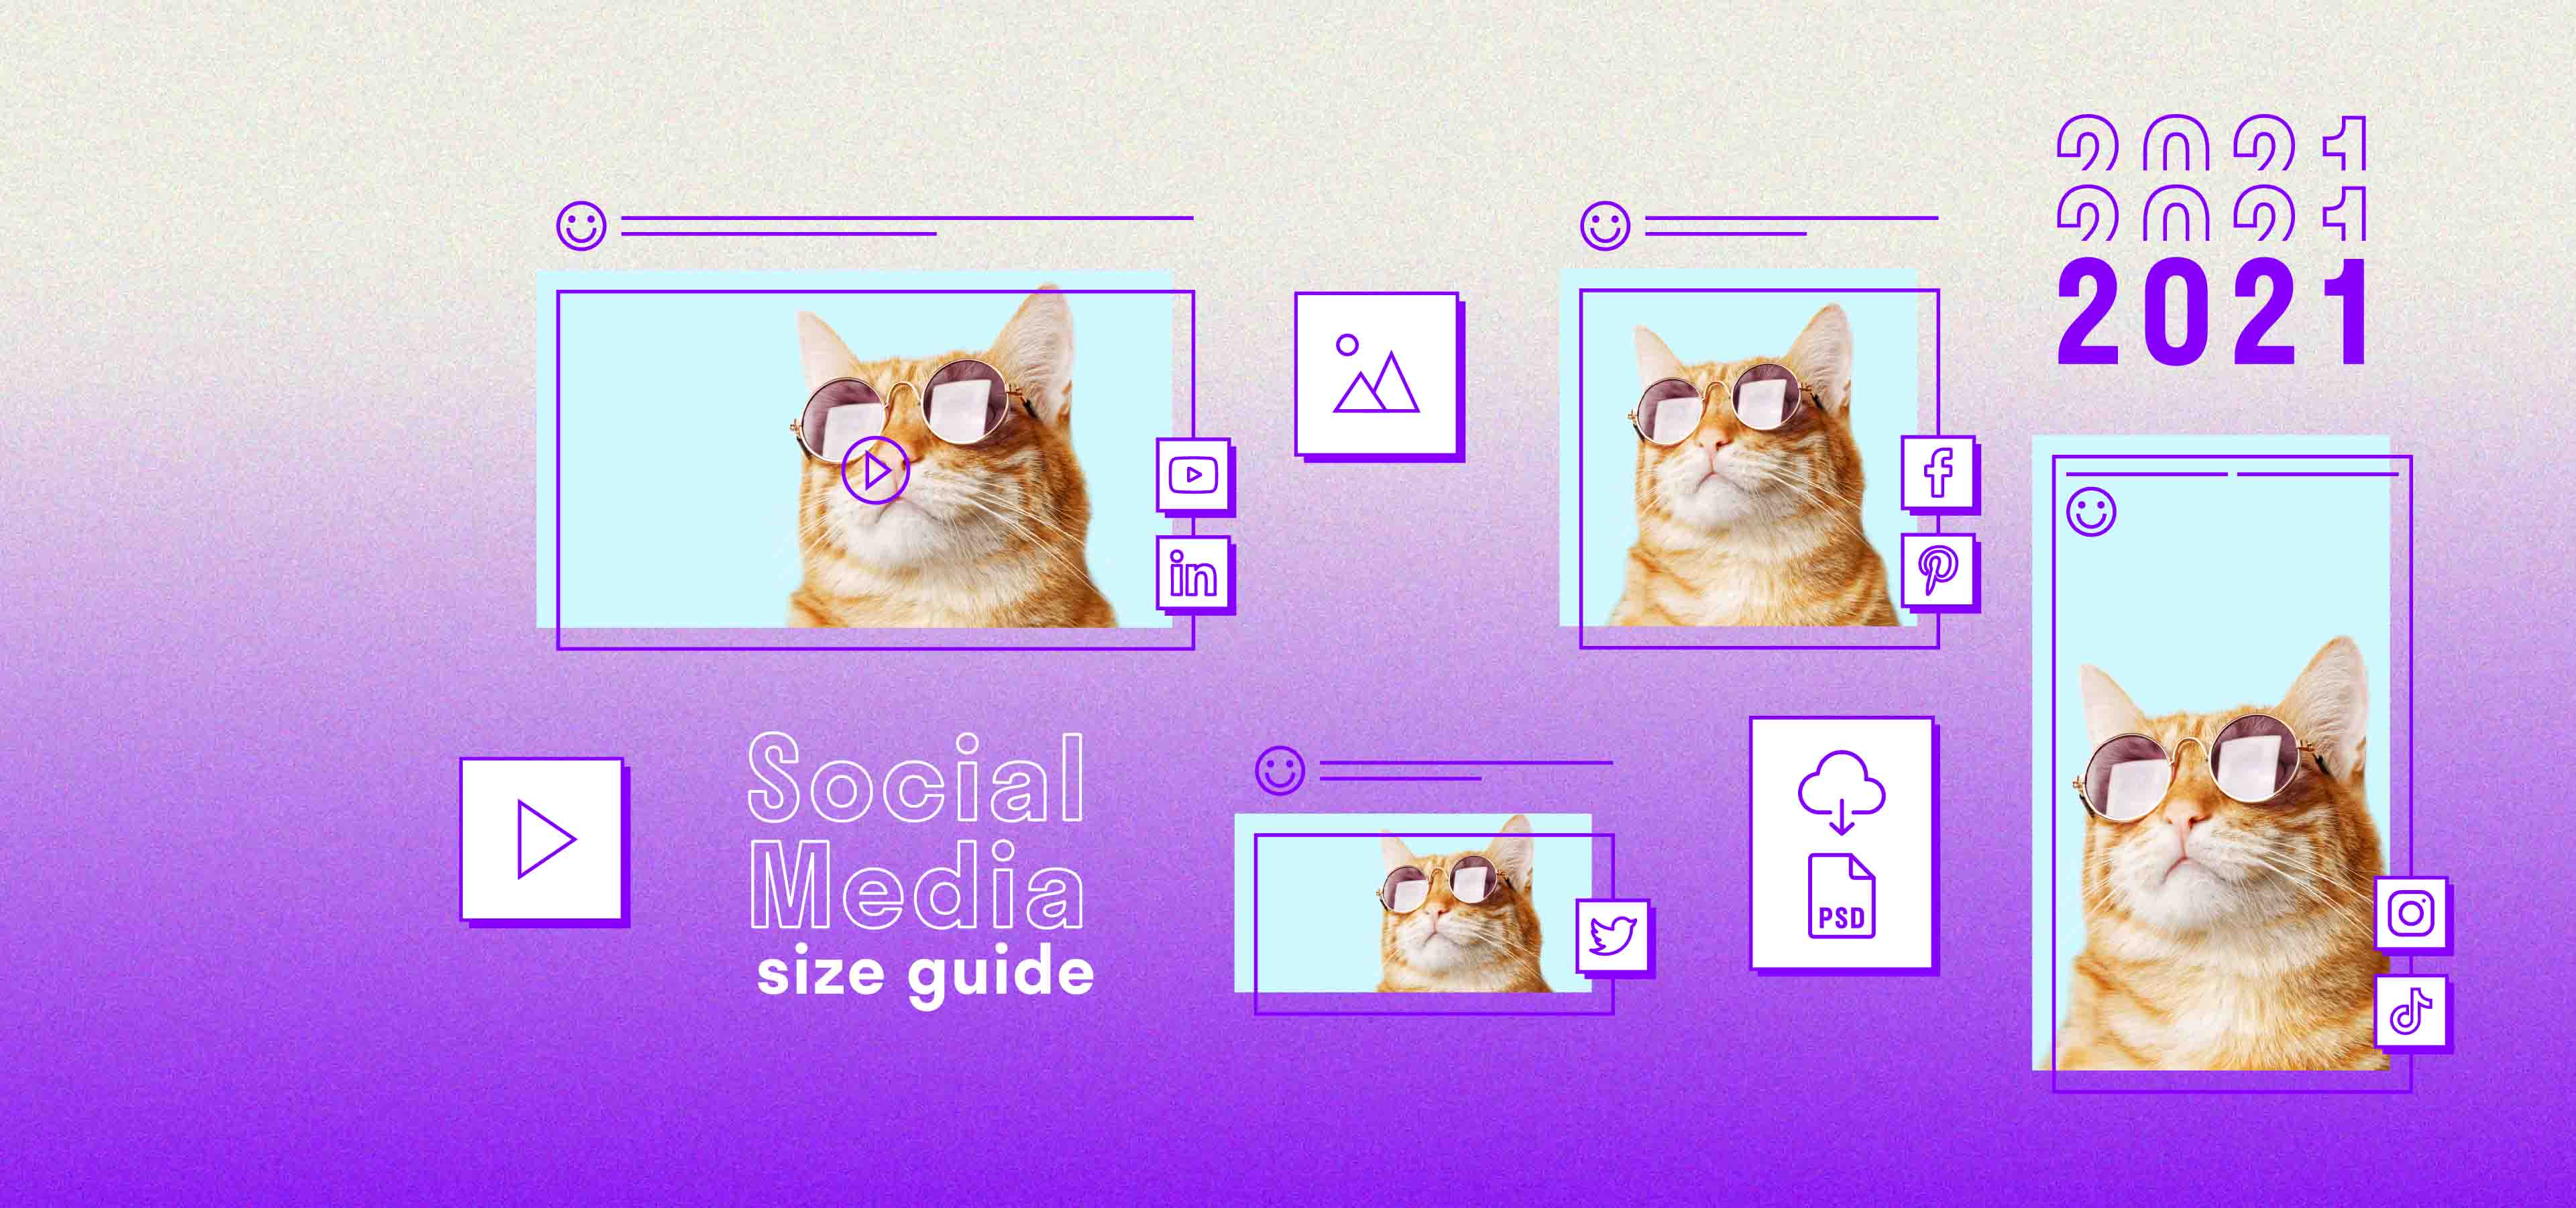 Social Media Image Sizes For 21 Free Psd Files And Cheat Sheets Falcon Io